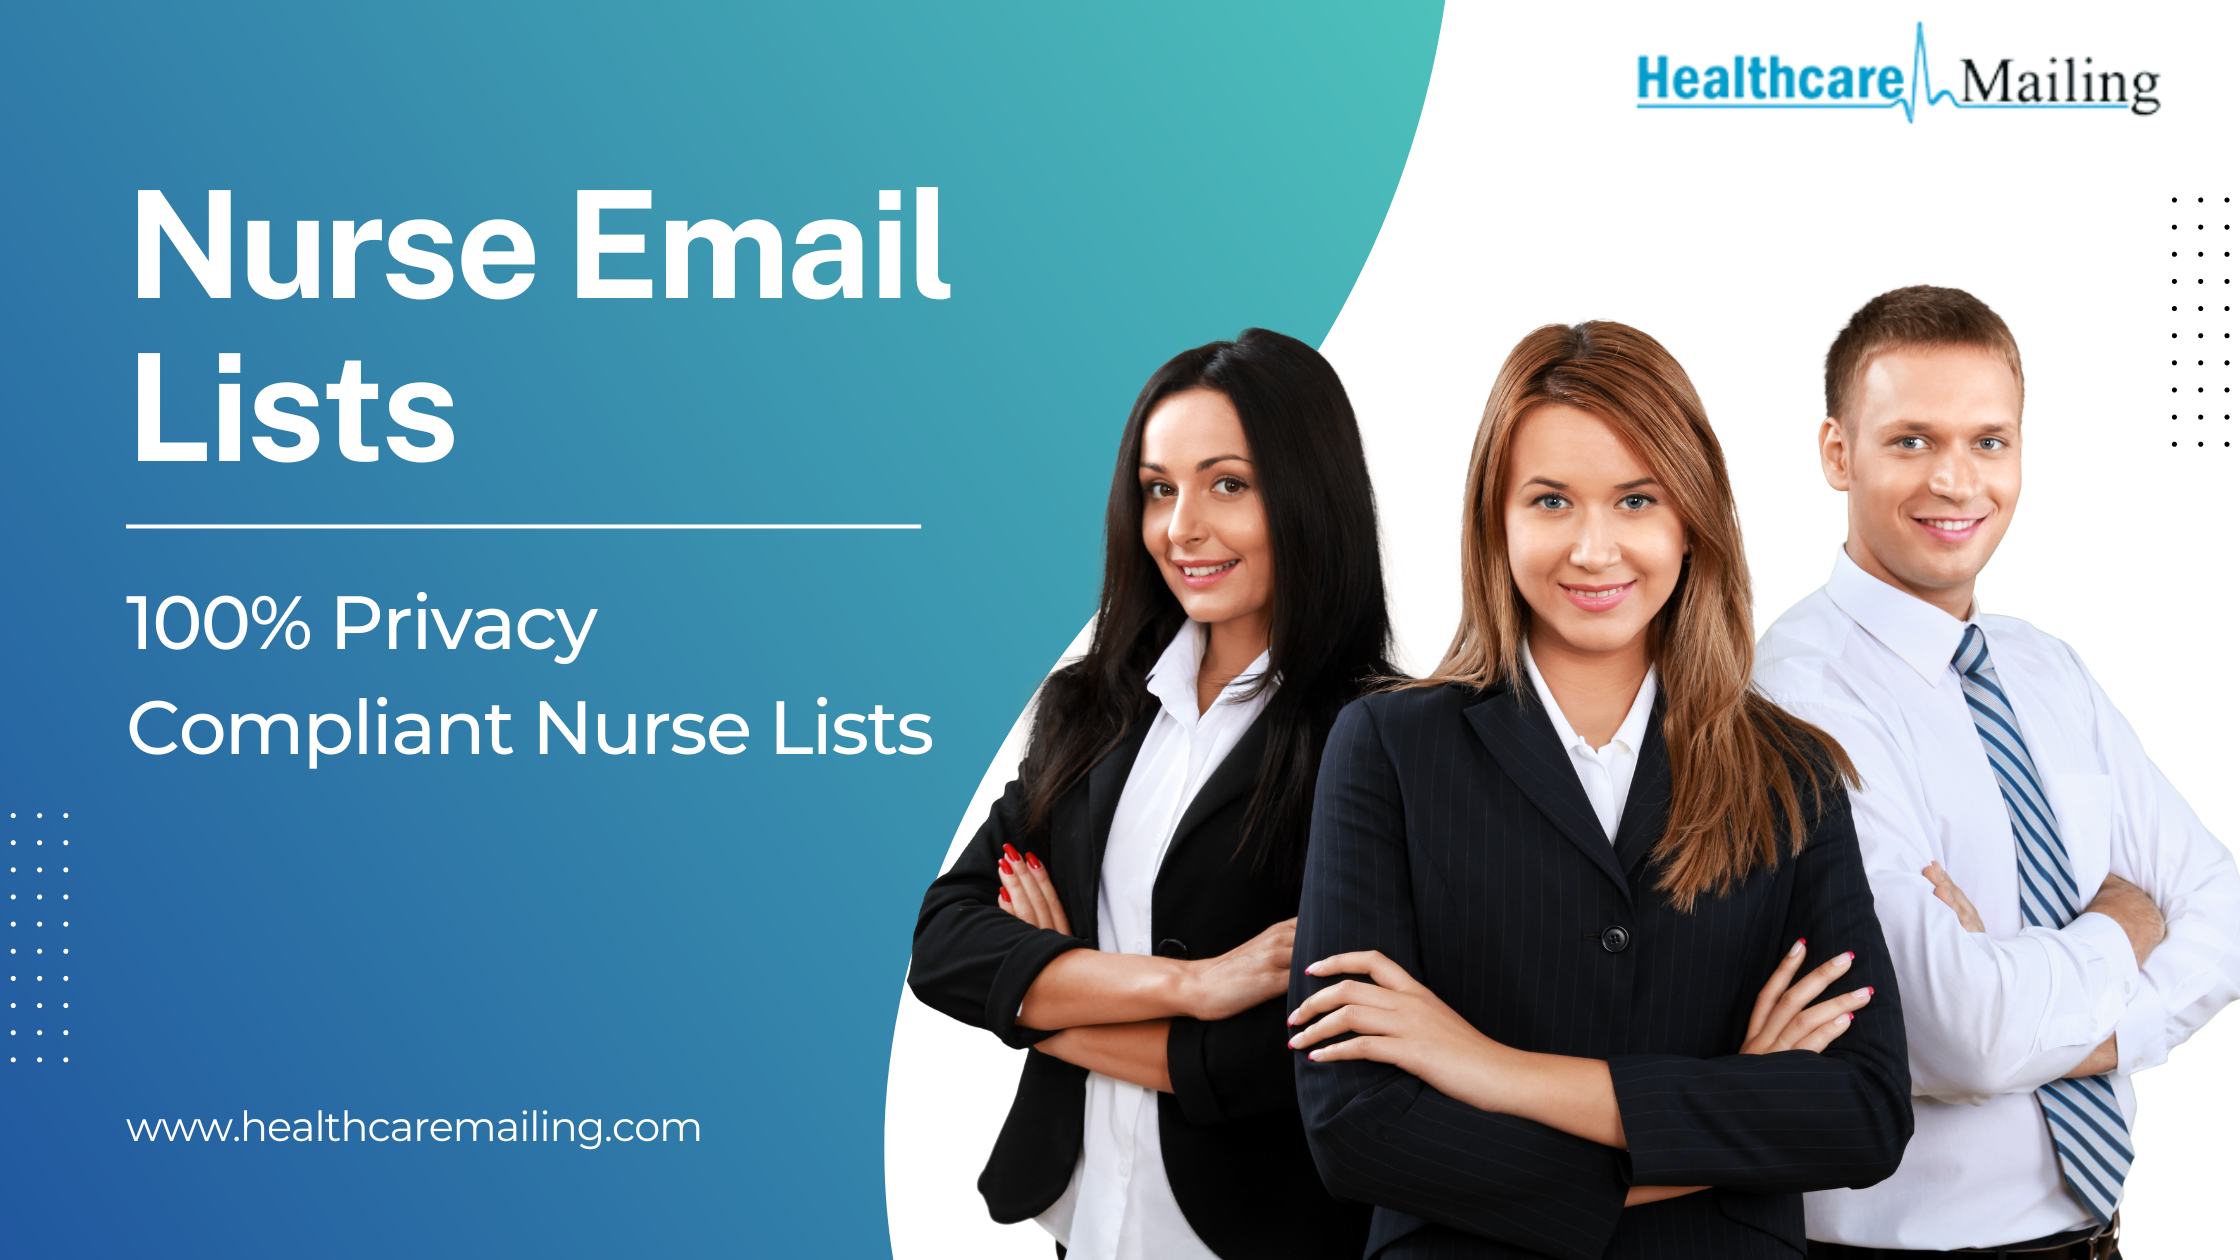 What are the benefits of nurse email lists?